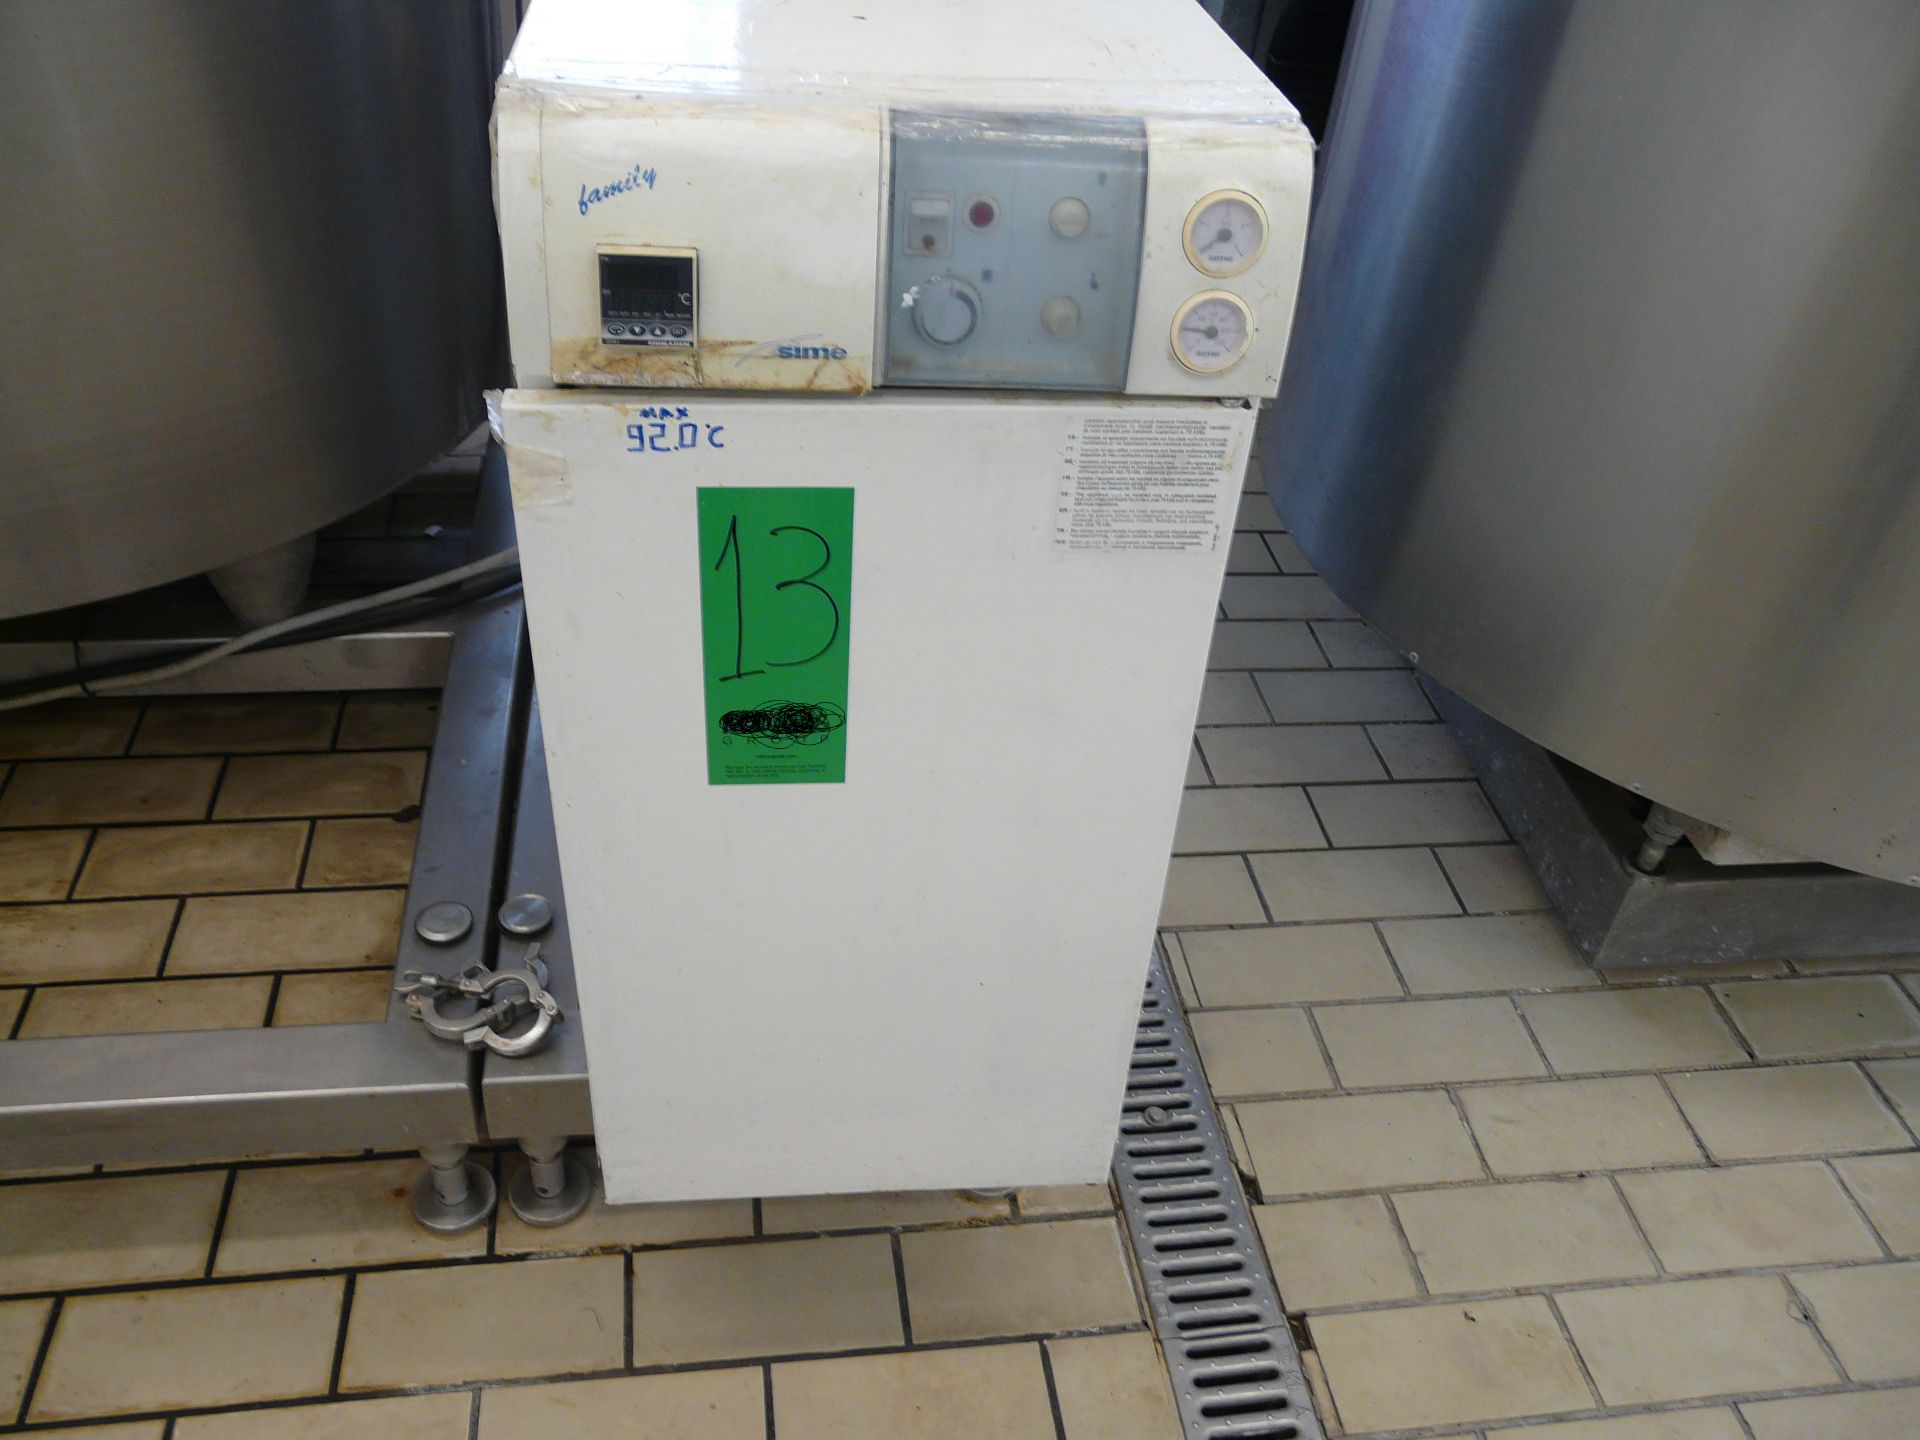 TETRA PAK HOYER HTST 1200 Pasteurizer for Ice Cream , Contains 2 x Tanks with agitators ,1 Plate - Image 13 of 20